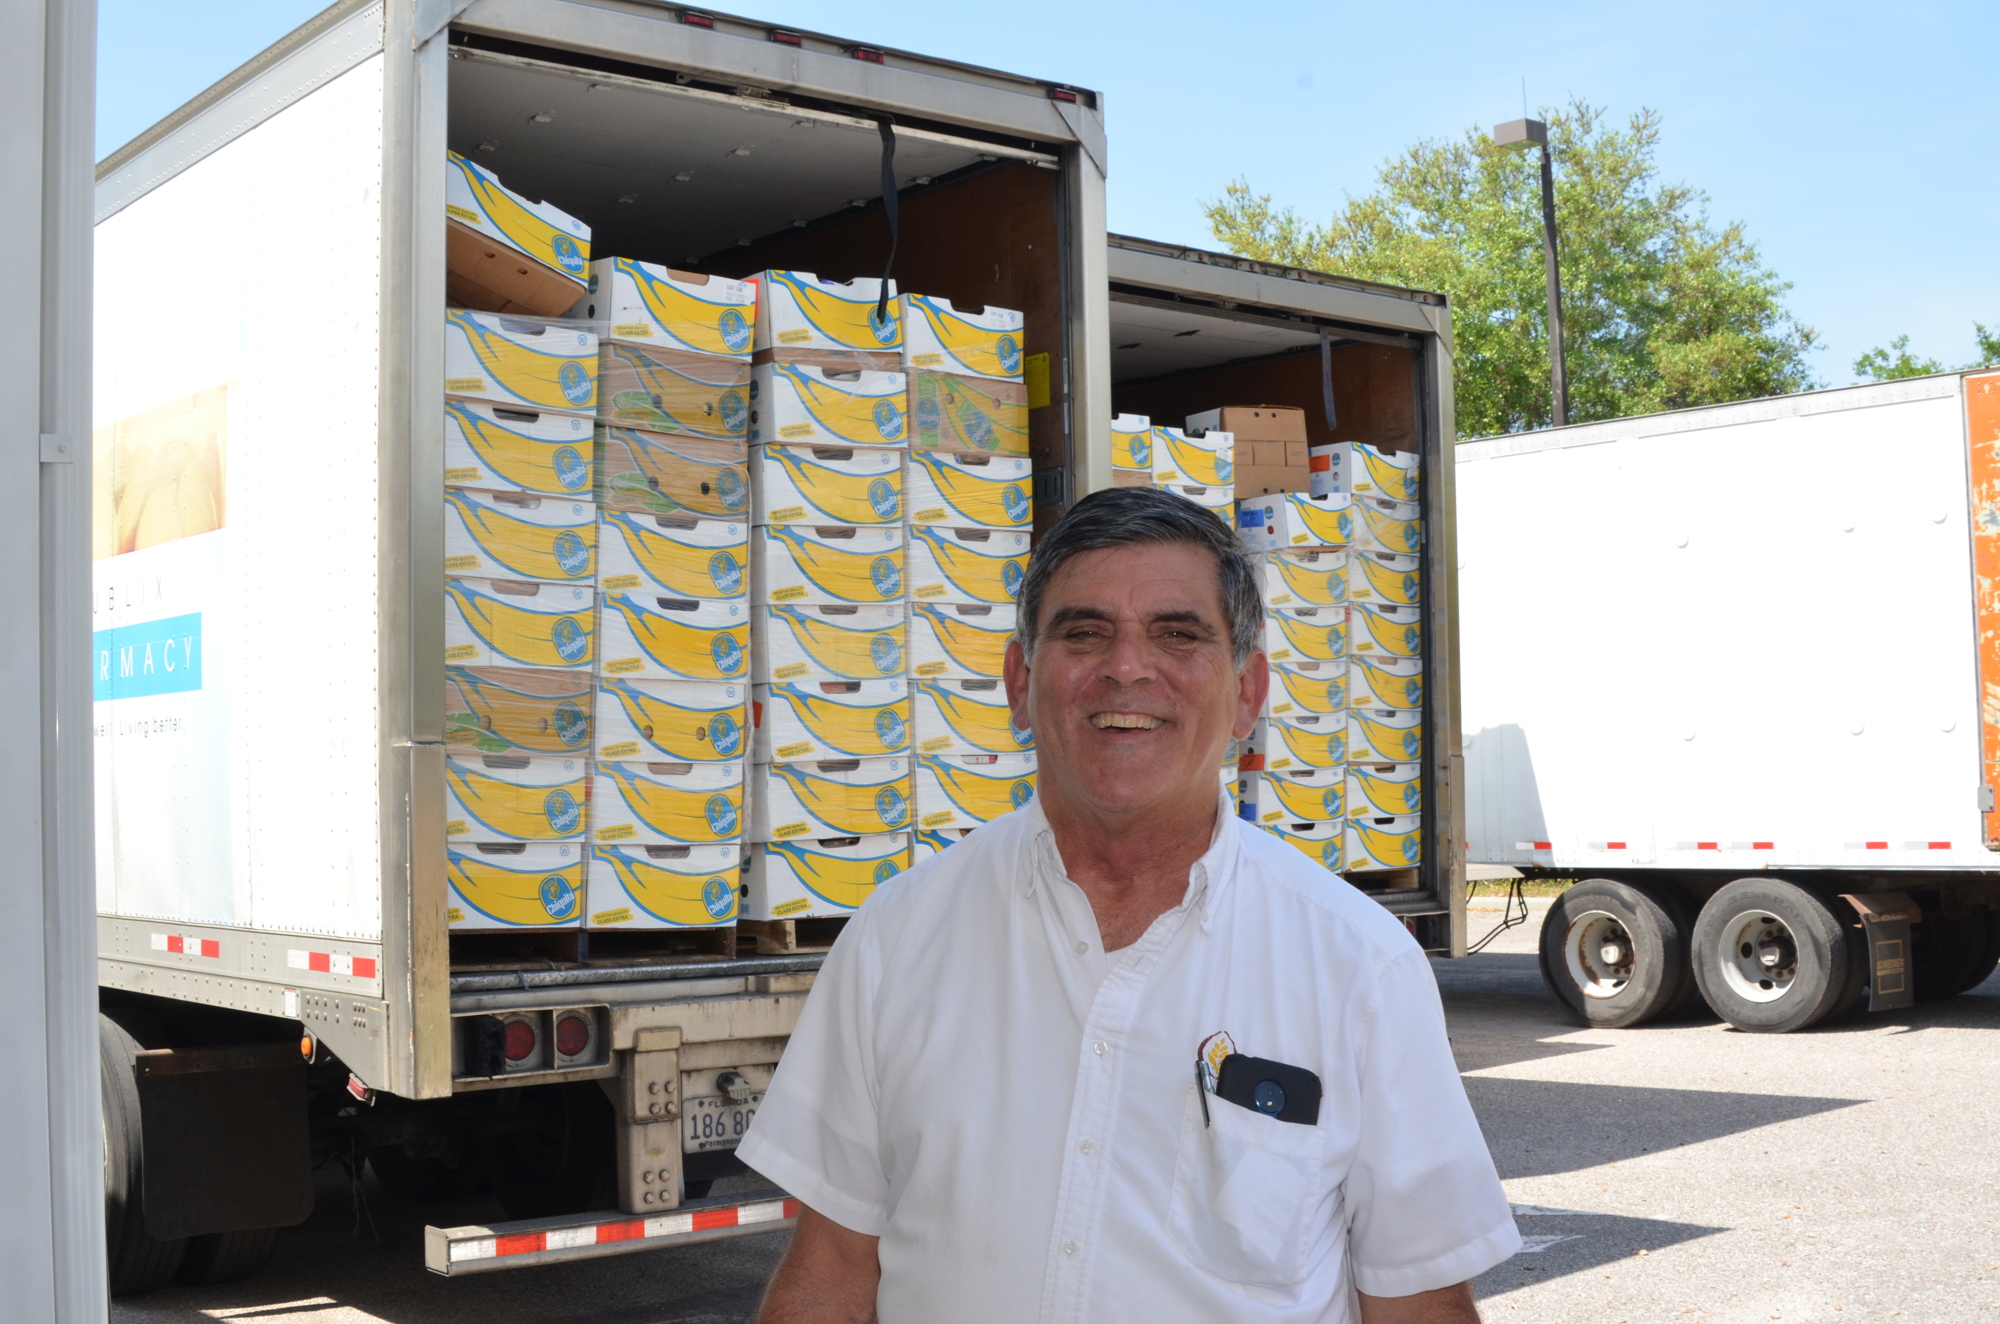 Southeastern Food Bank founder Mark Anthony prepared for the 28th annual Food For Families spring project.